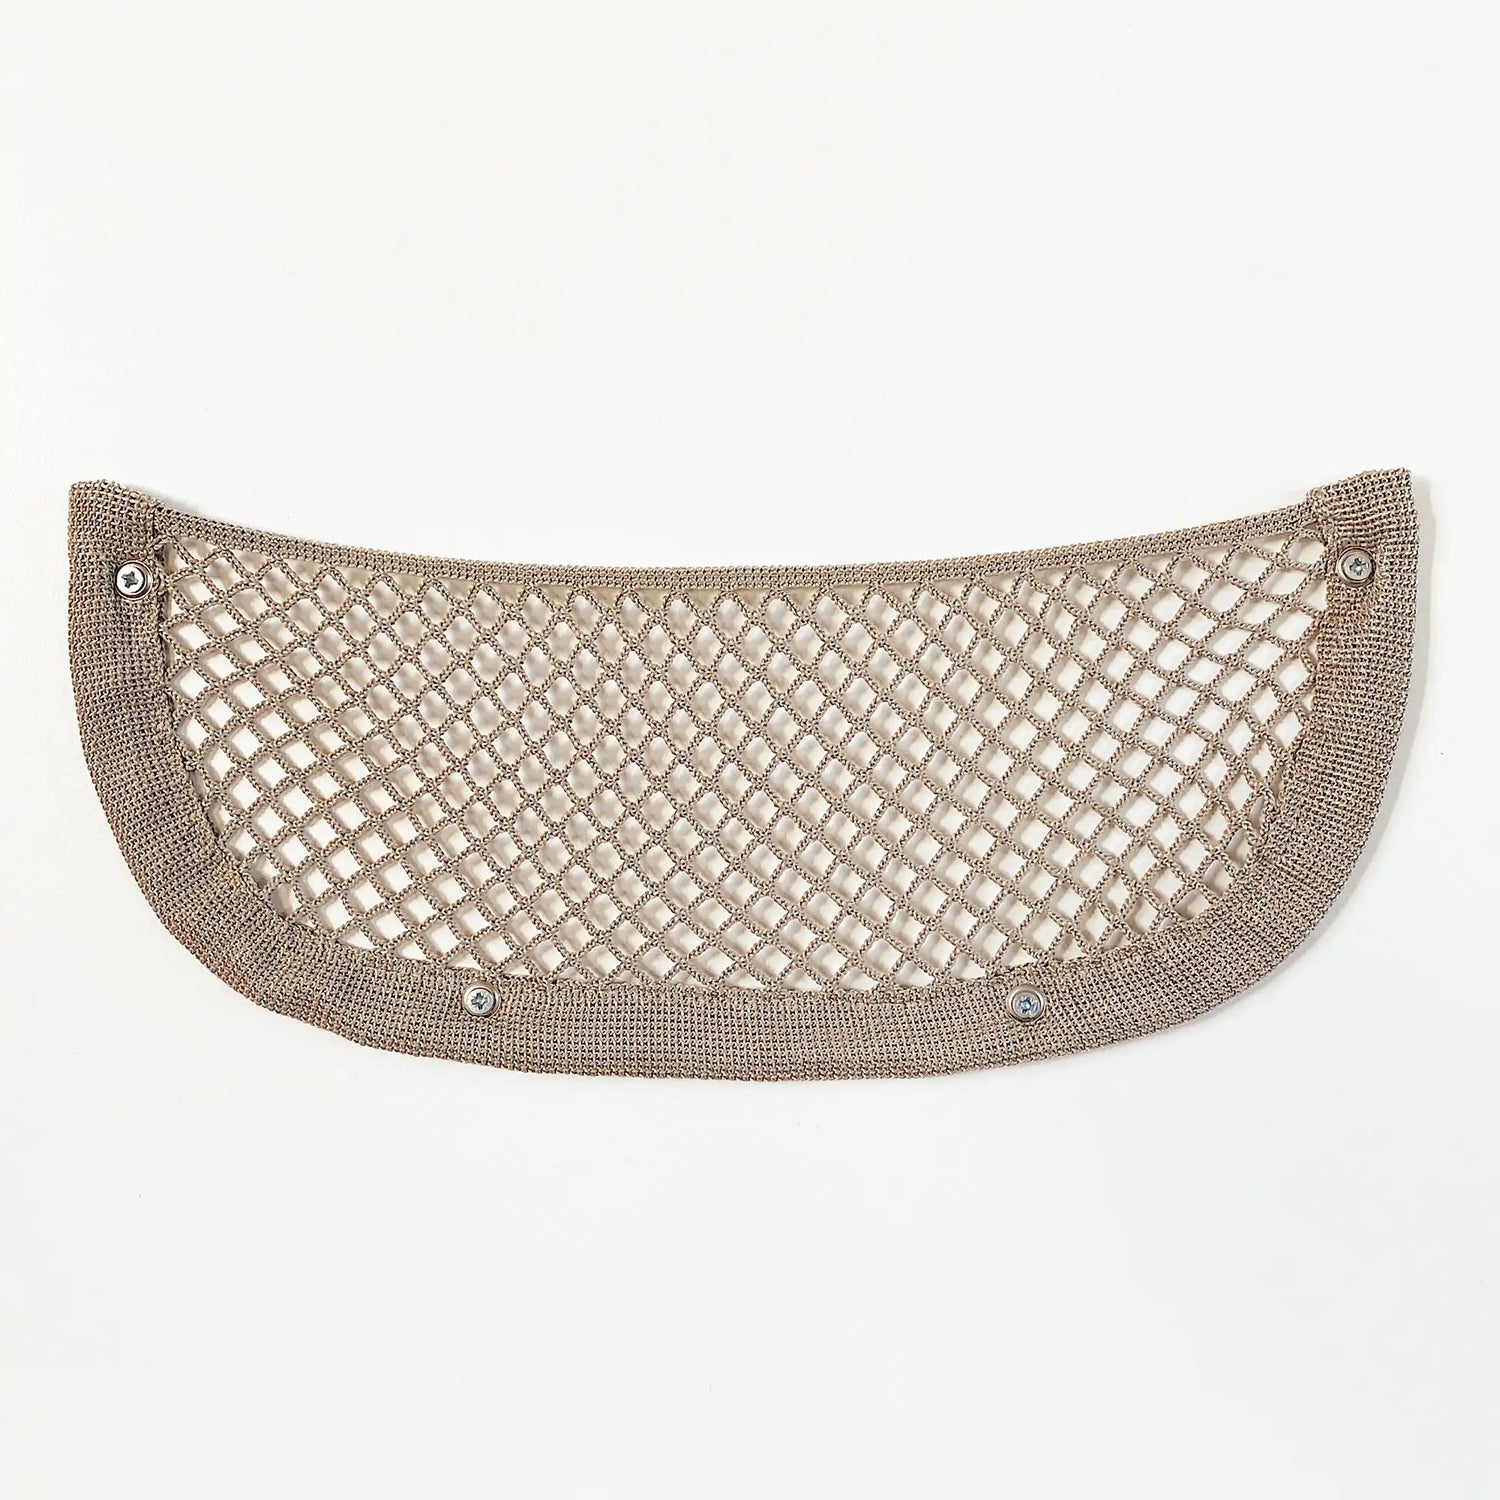 Elastic mesh bag for any surface, 13 x 30 cm